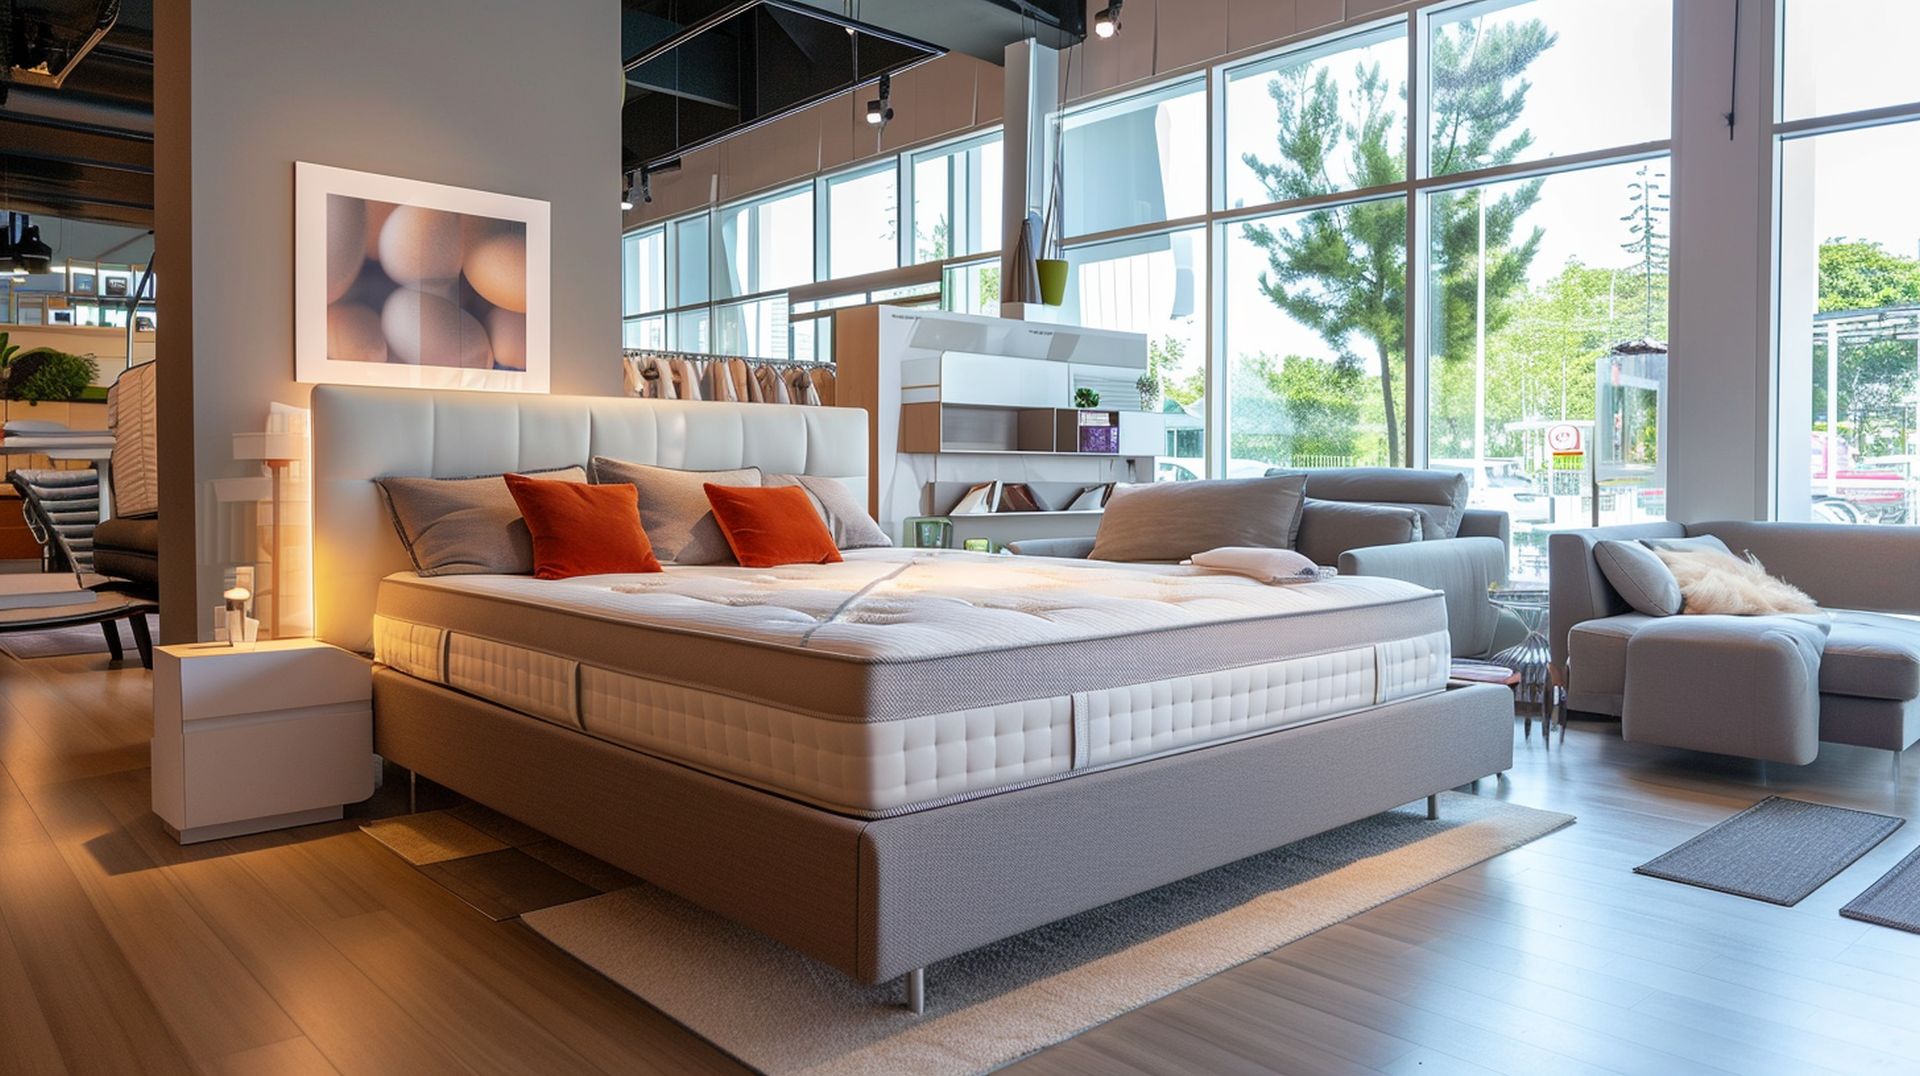 If you're looking for a new bed, mattress stores in Cedar Park offer the best customer and delivery service, financing, and warranties in Texas